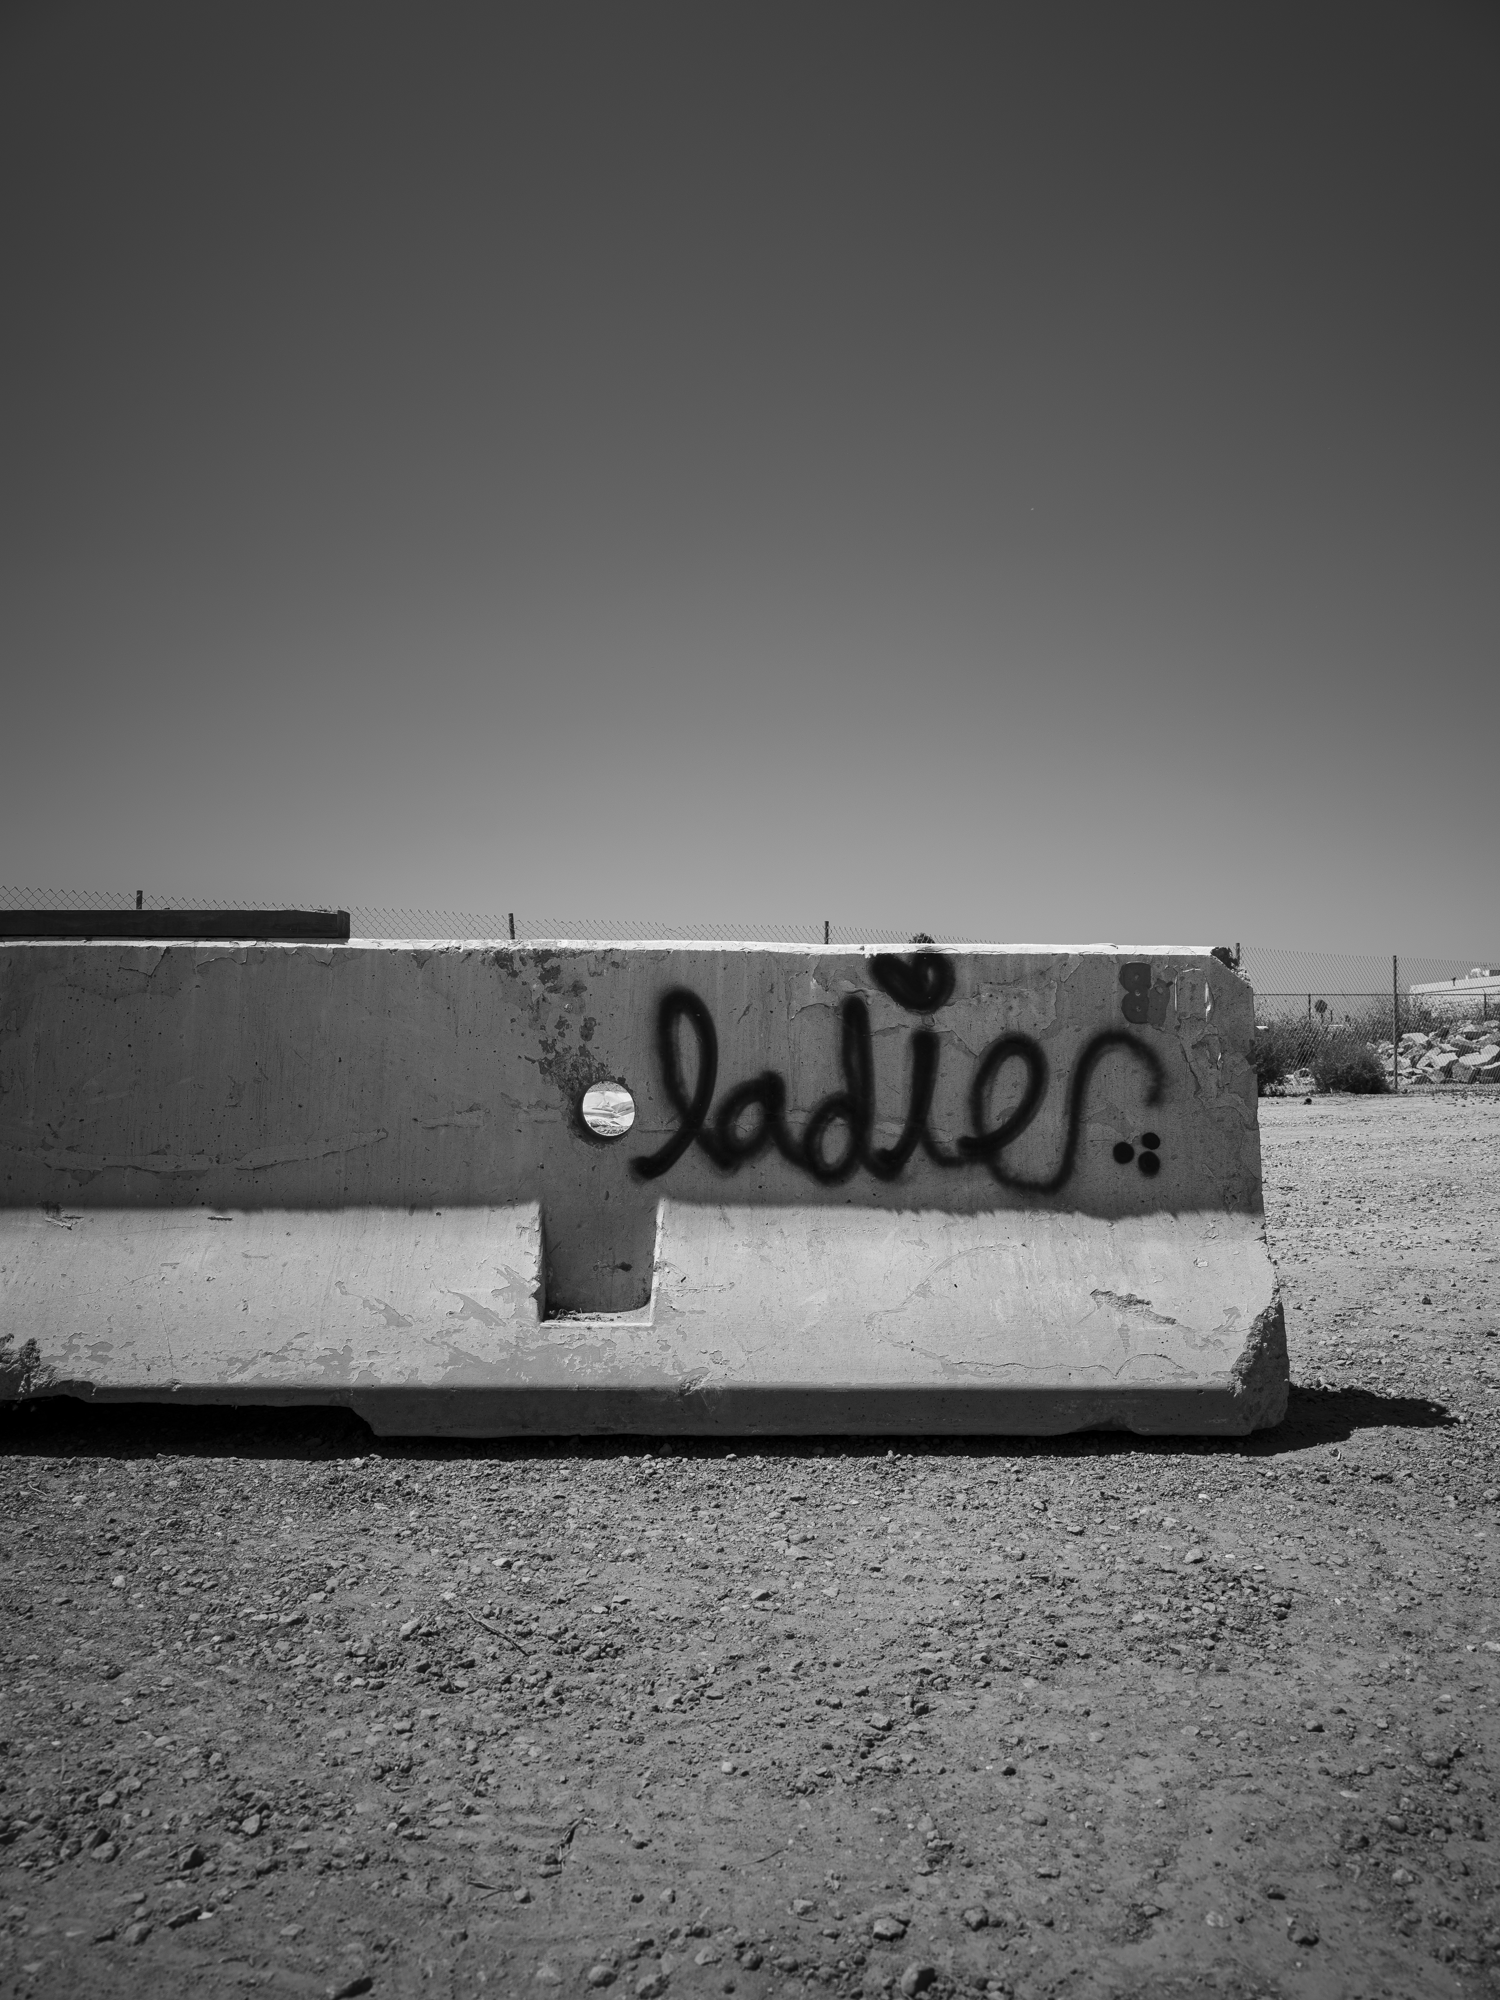 Minimal urban landscape photograph of architecture with spray painted Ladie on a freeway barricade